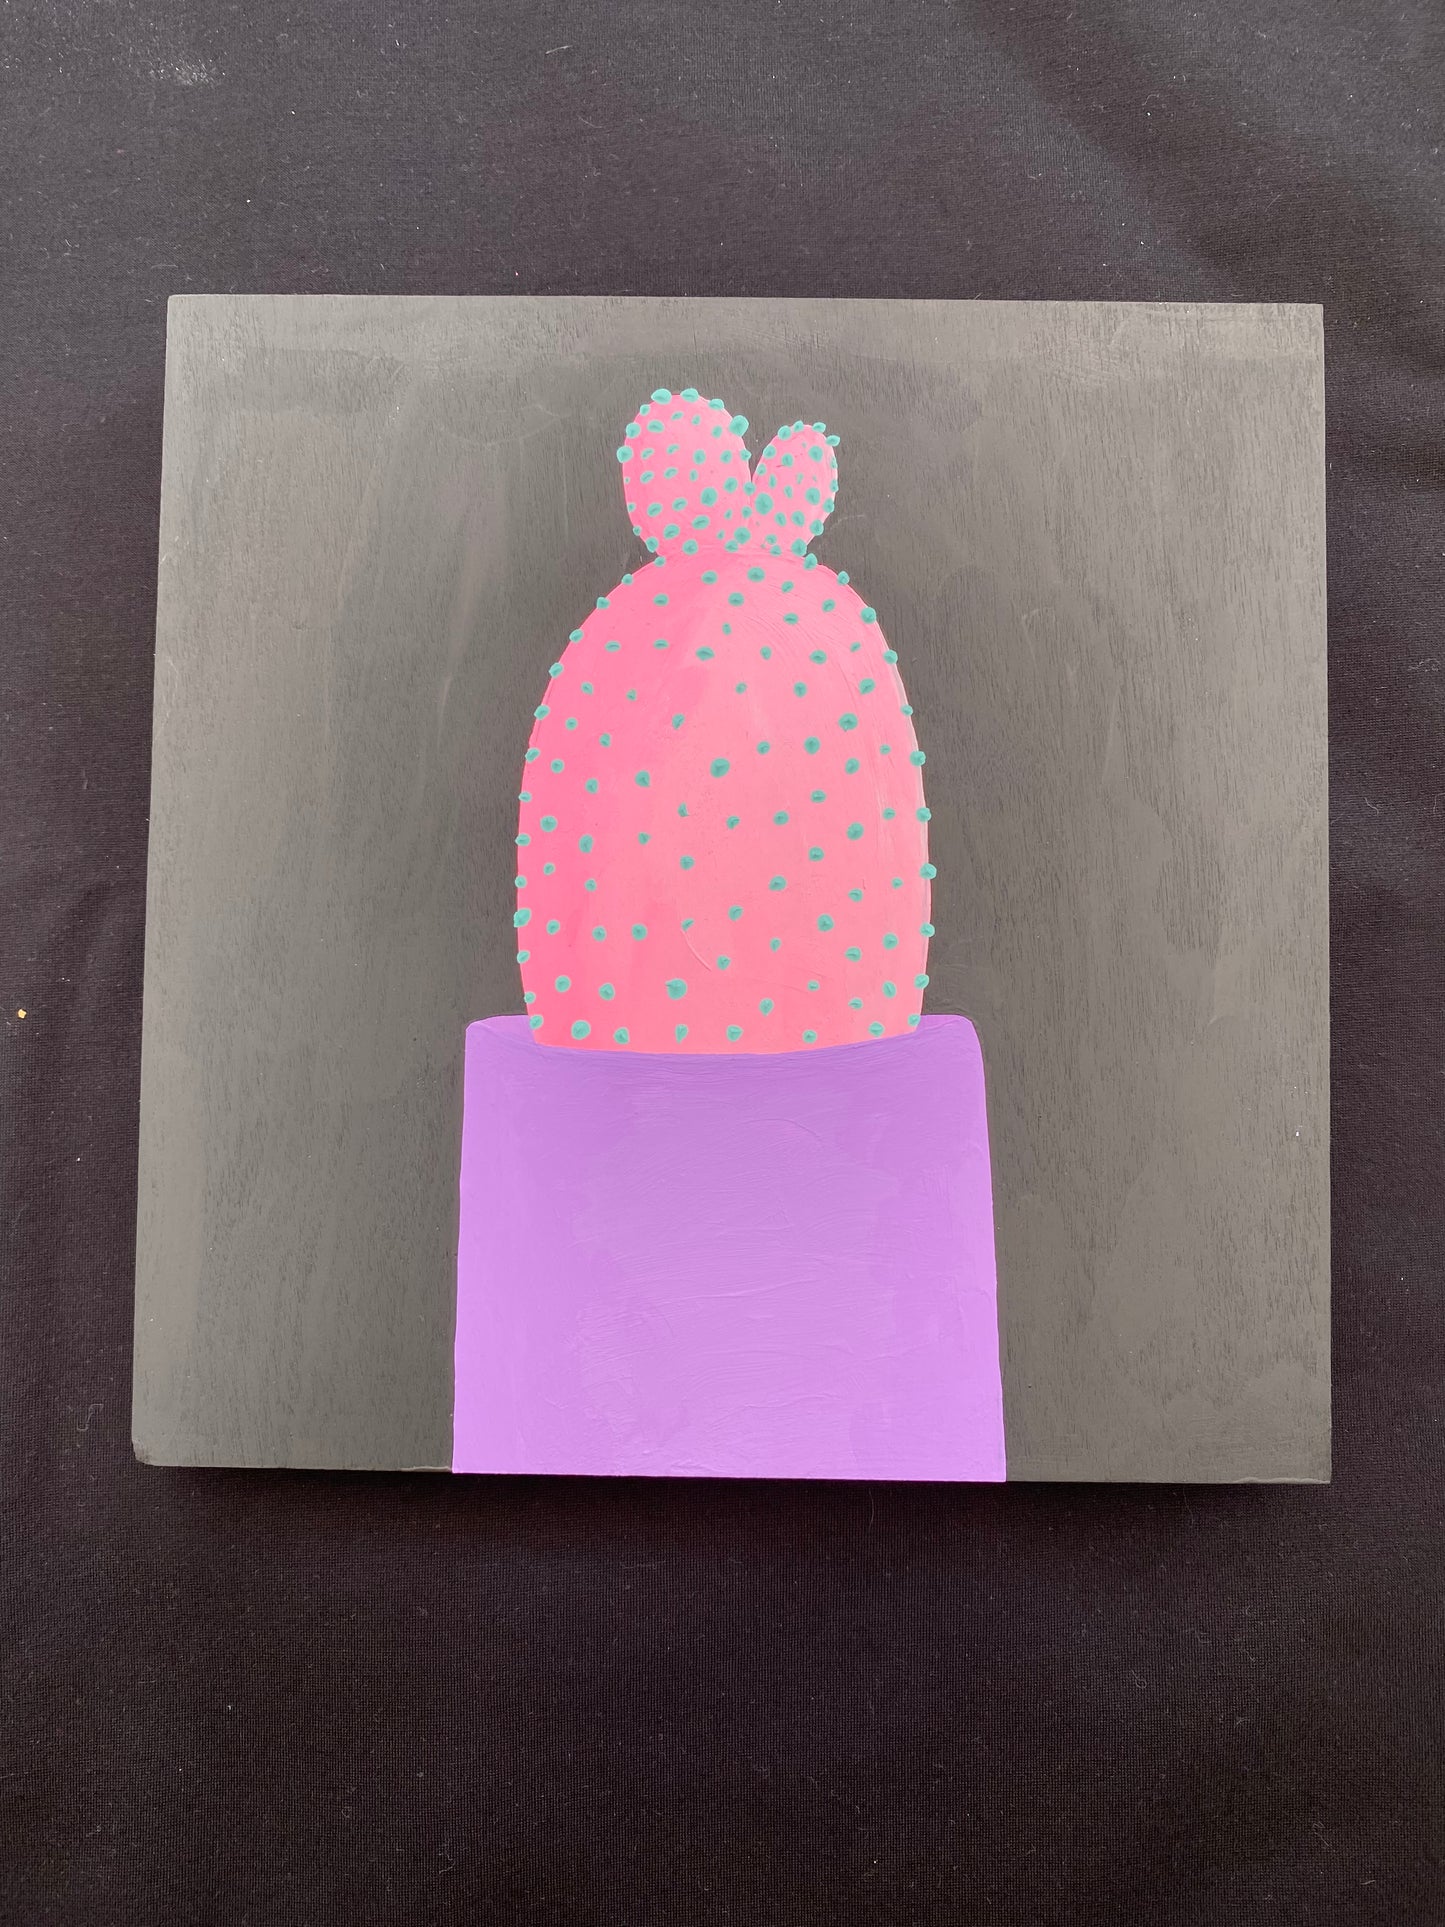 Painting Pink Prickly Pear Cactus